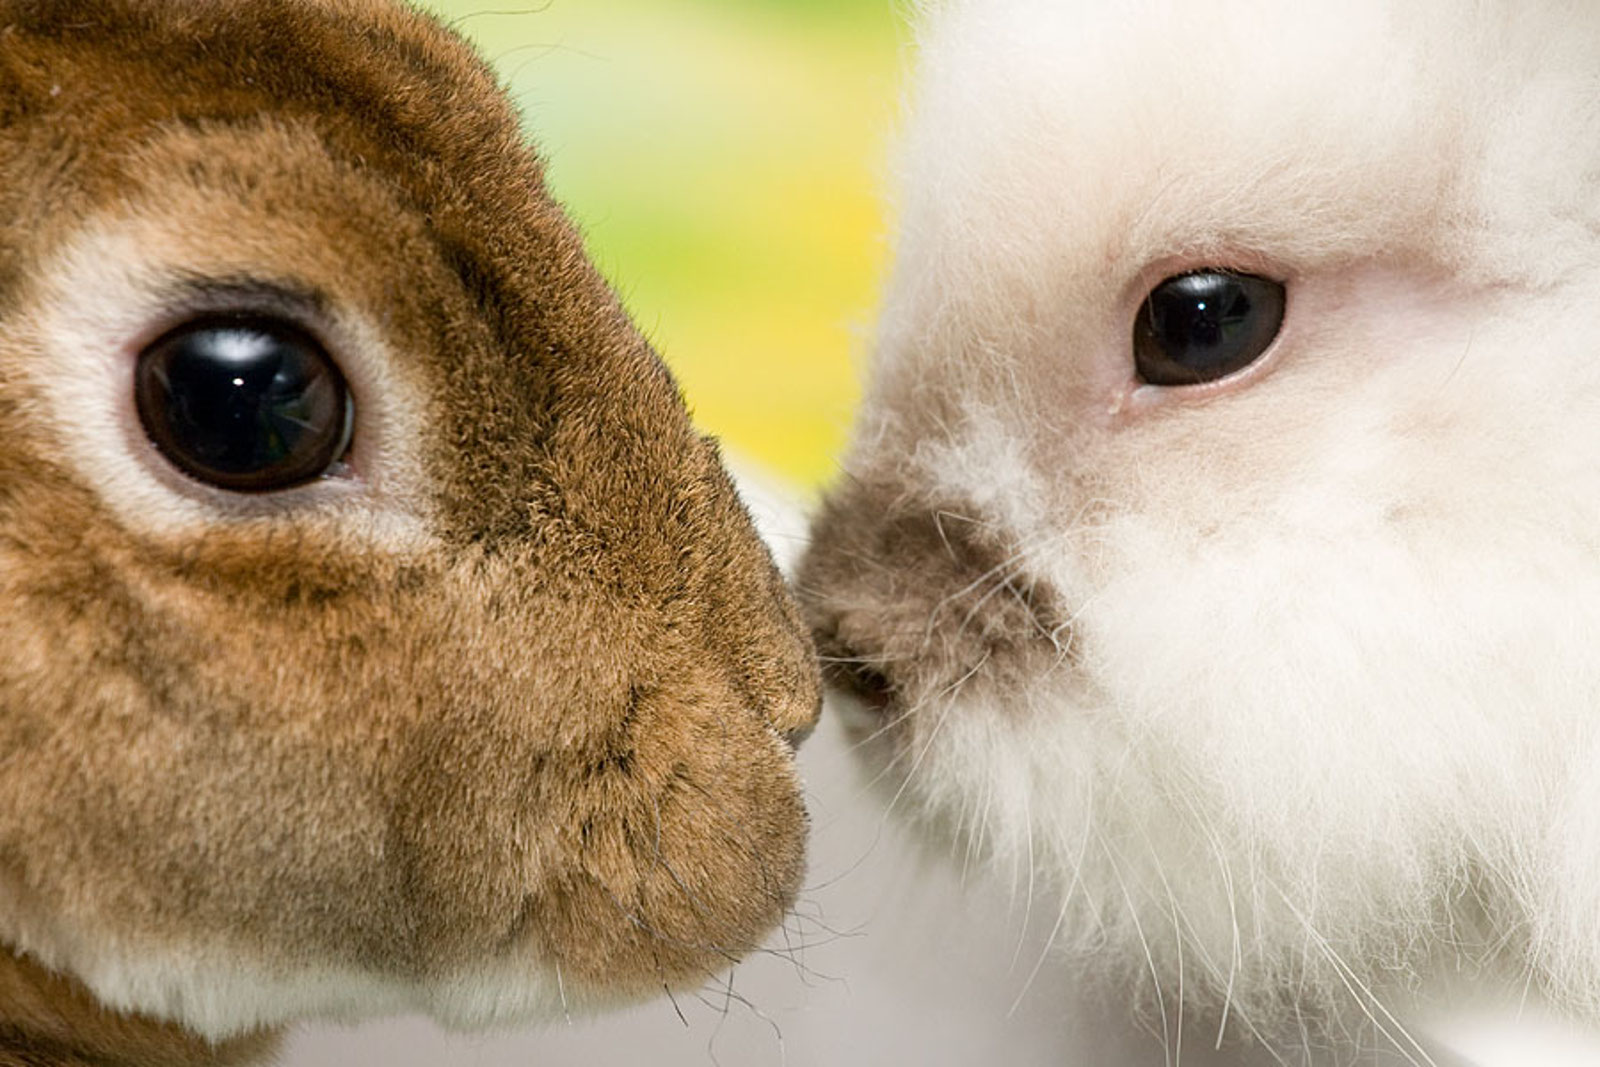 Love Makeup But Hate Animal Testing? Check Out These 11 Cruelty-Free Cosmetic Brands